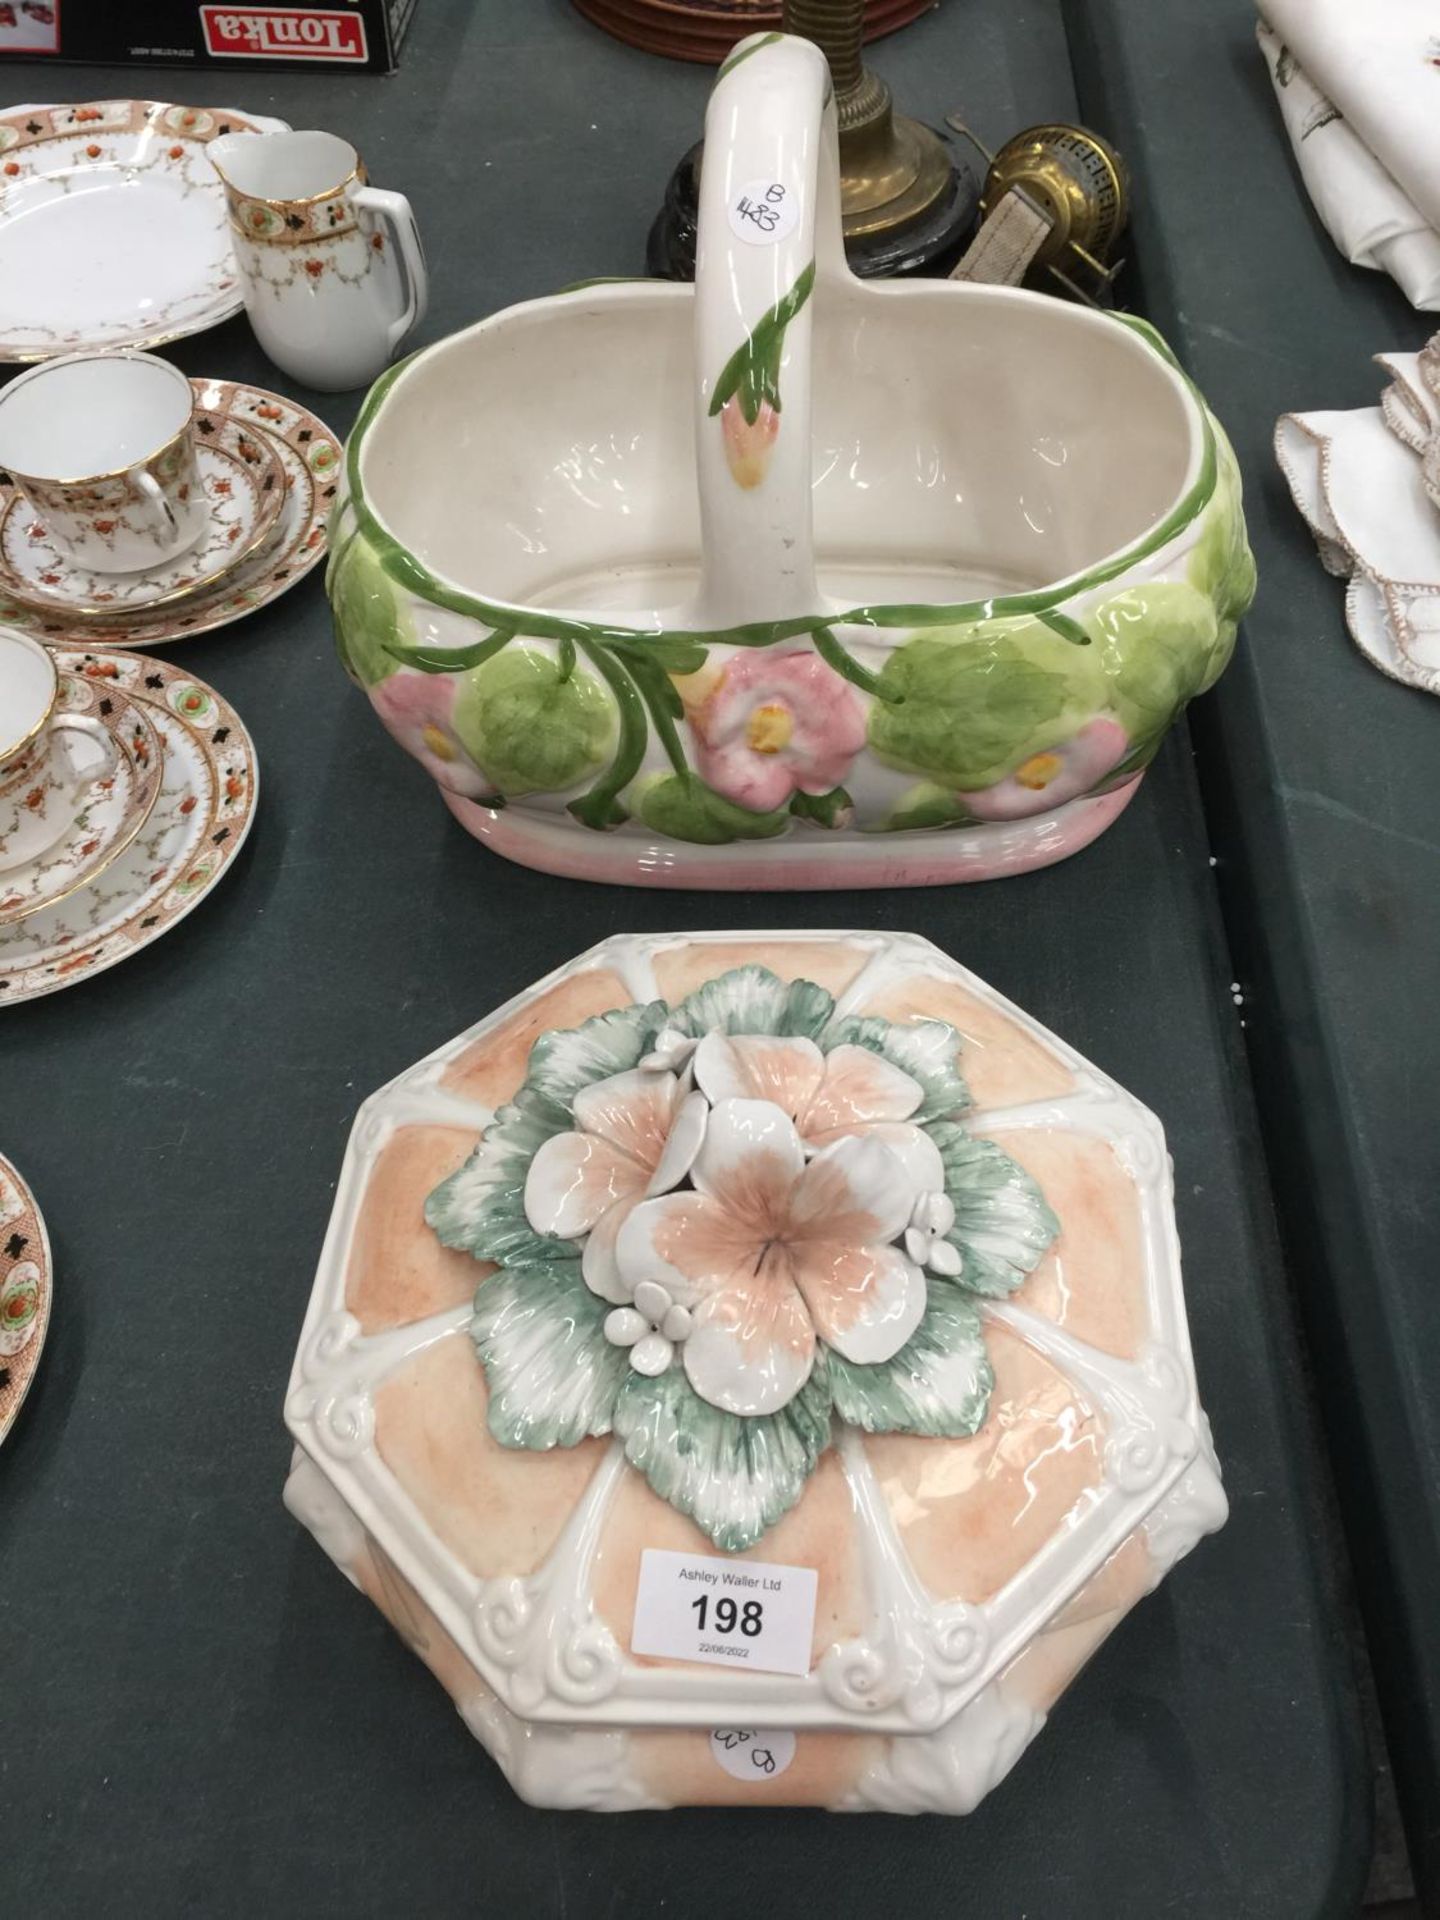 A PLANTER IN THE SHAPE OF A BASKET AND AN APRICOT COLOURED FLORAL TUREEN